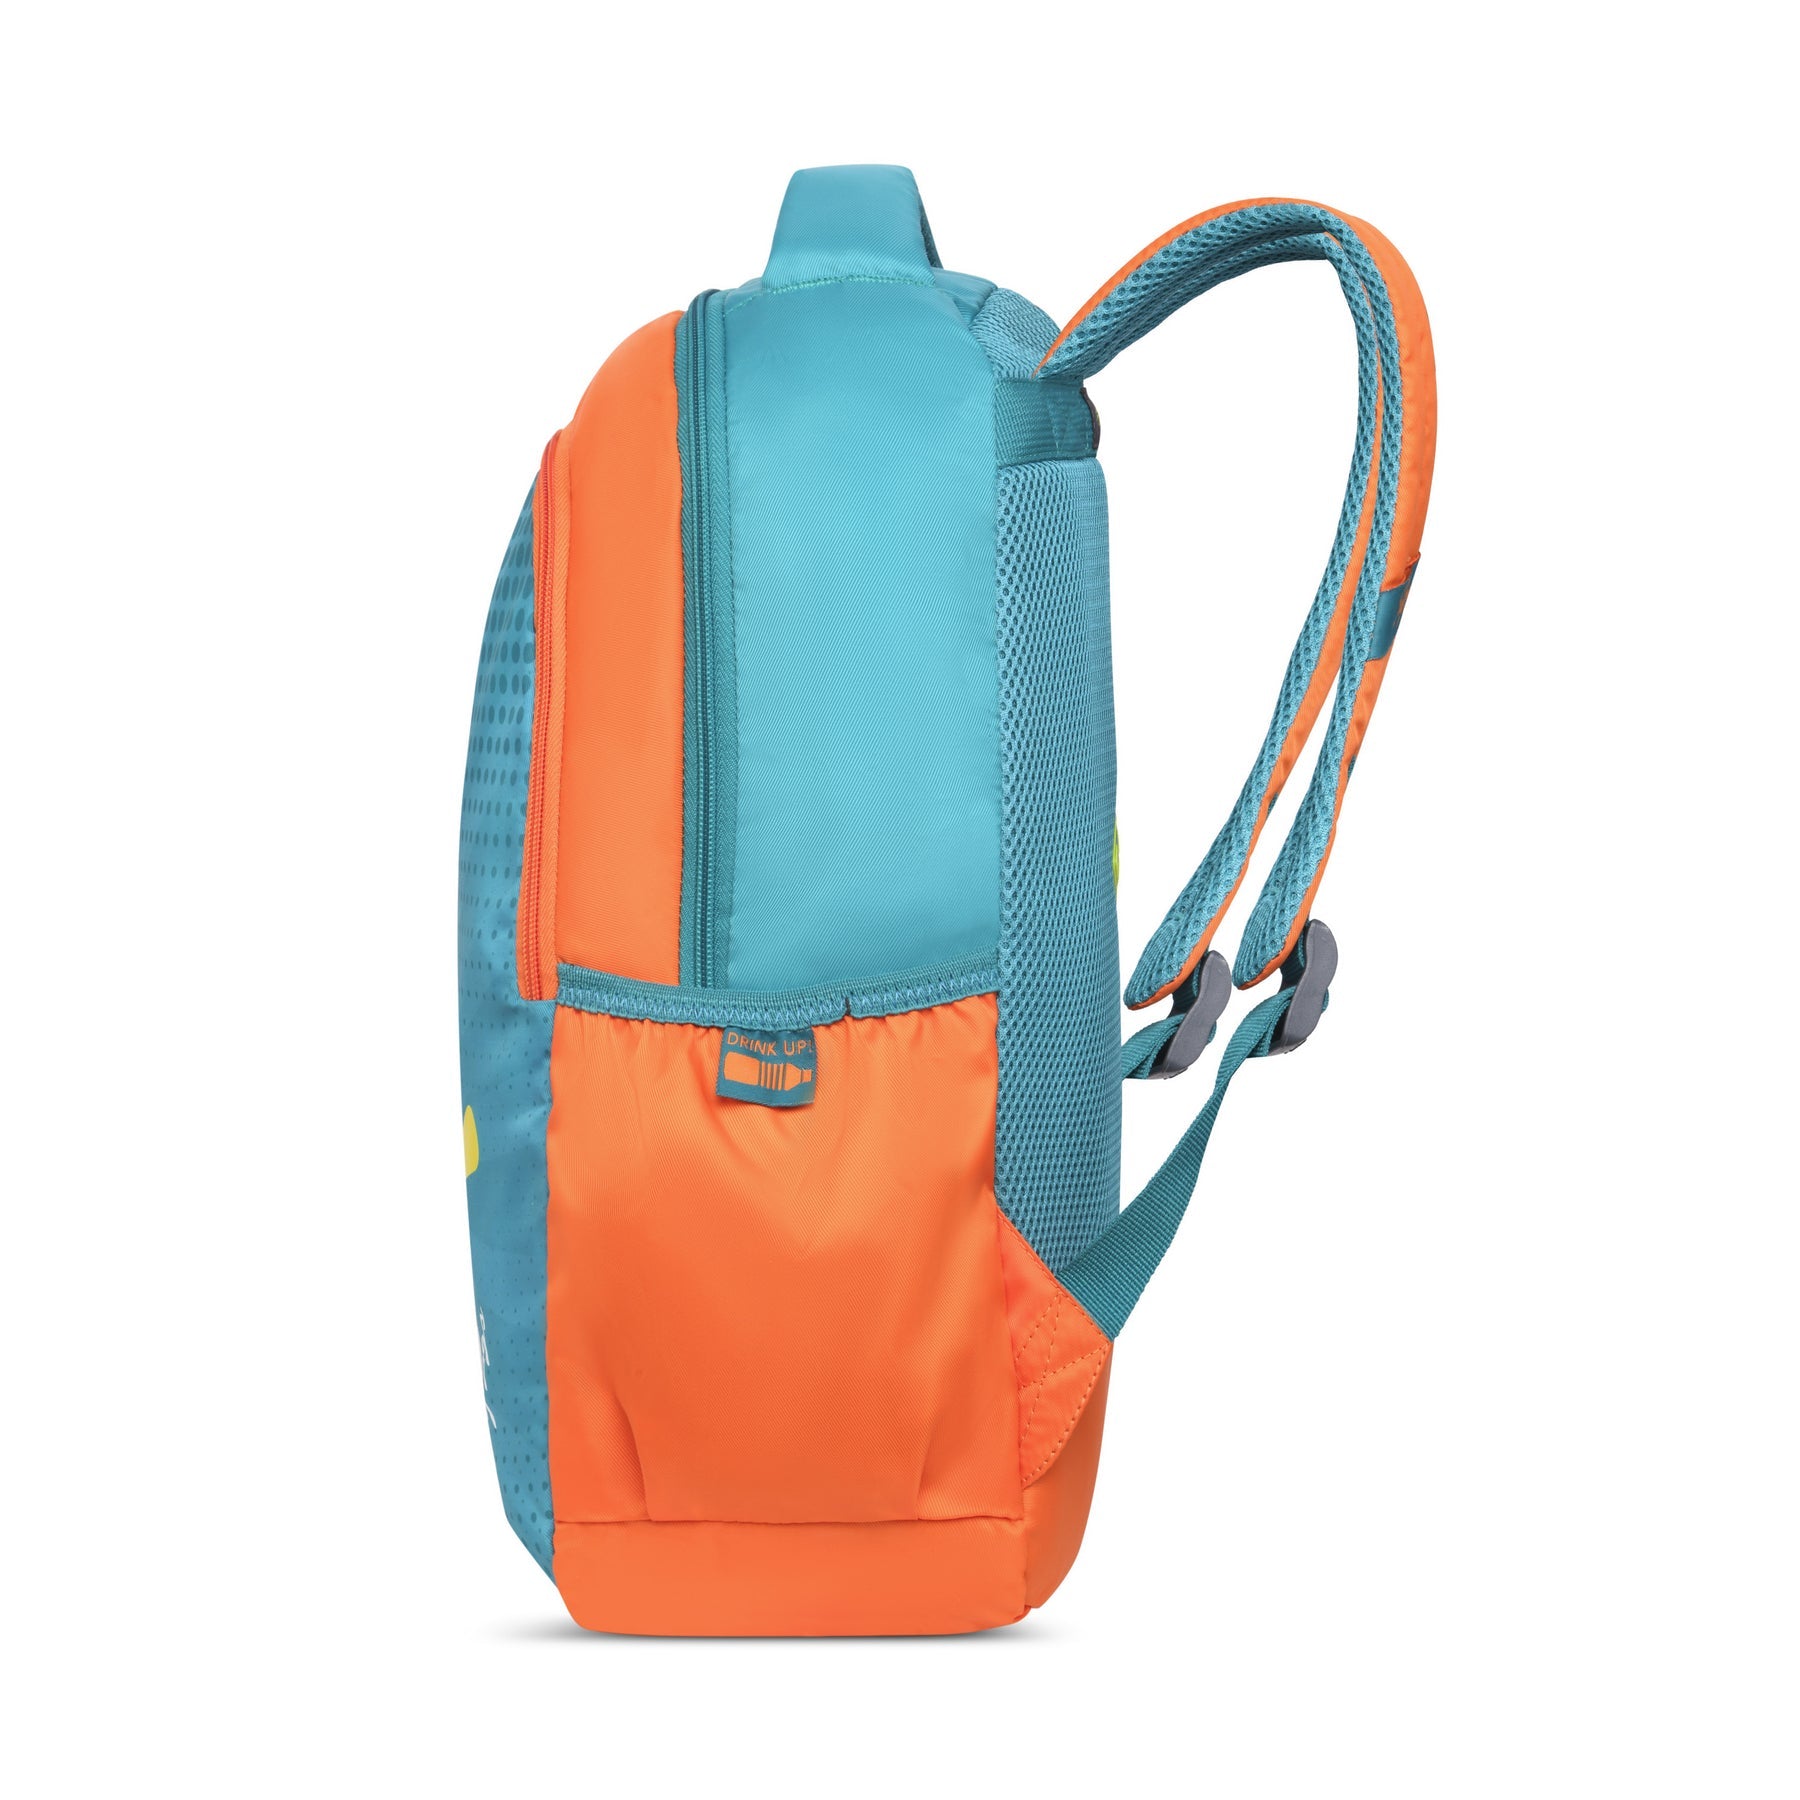 Skybags Bubbles 02 School Backpack | Bags & Sleeves | Halabh.com